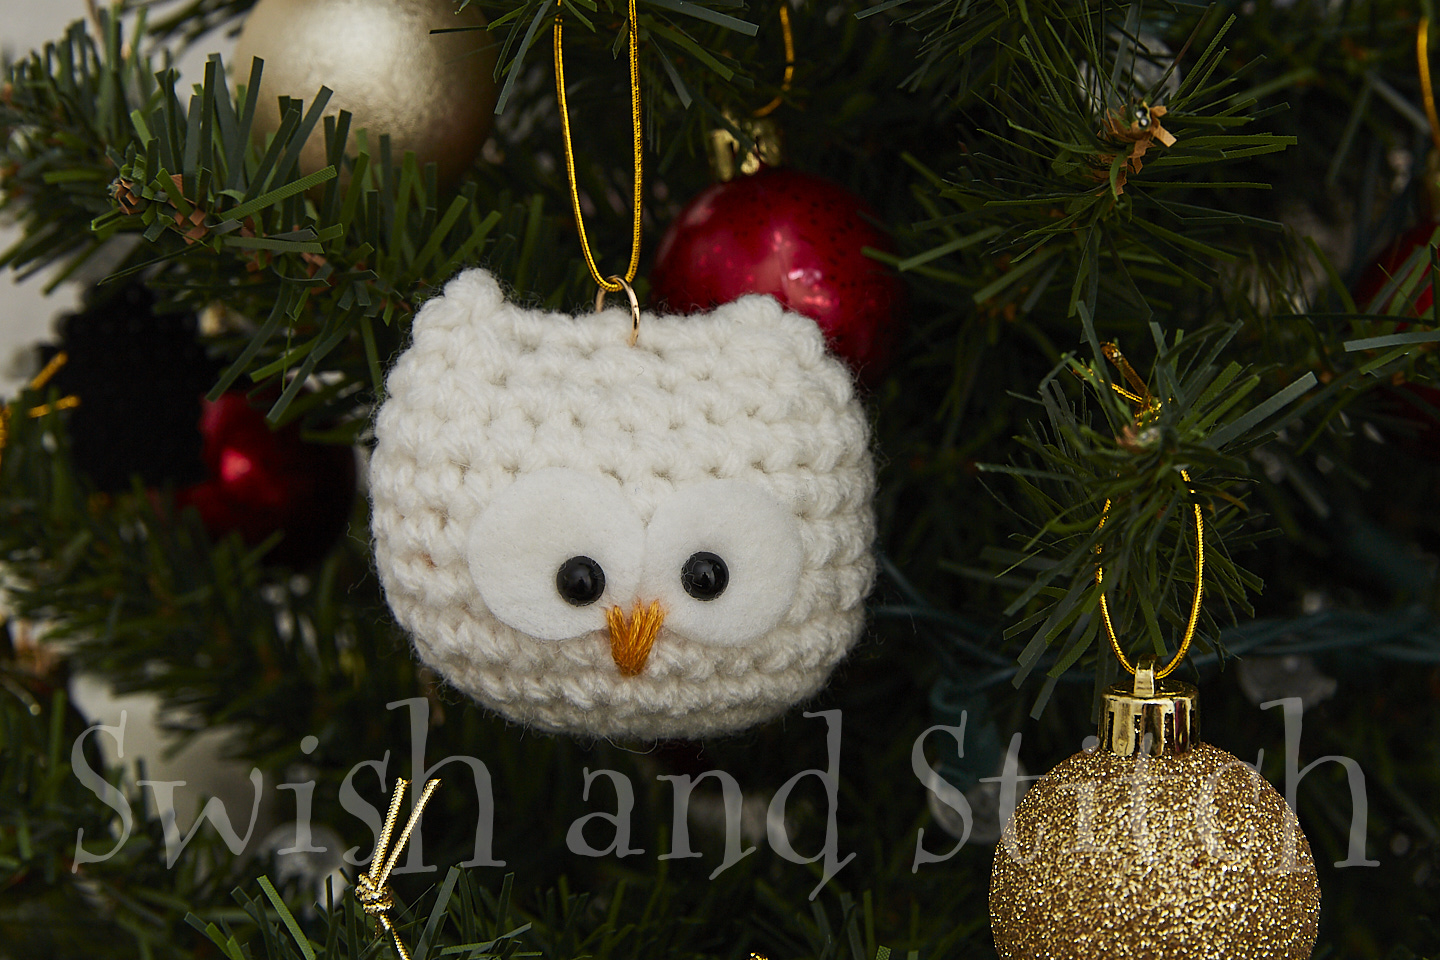 Harry Potter Crocheted Snowy Owl Christmas Ornaments - Swish and Stitch